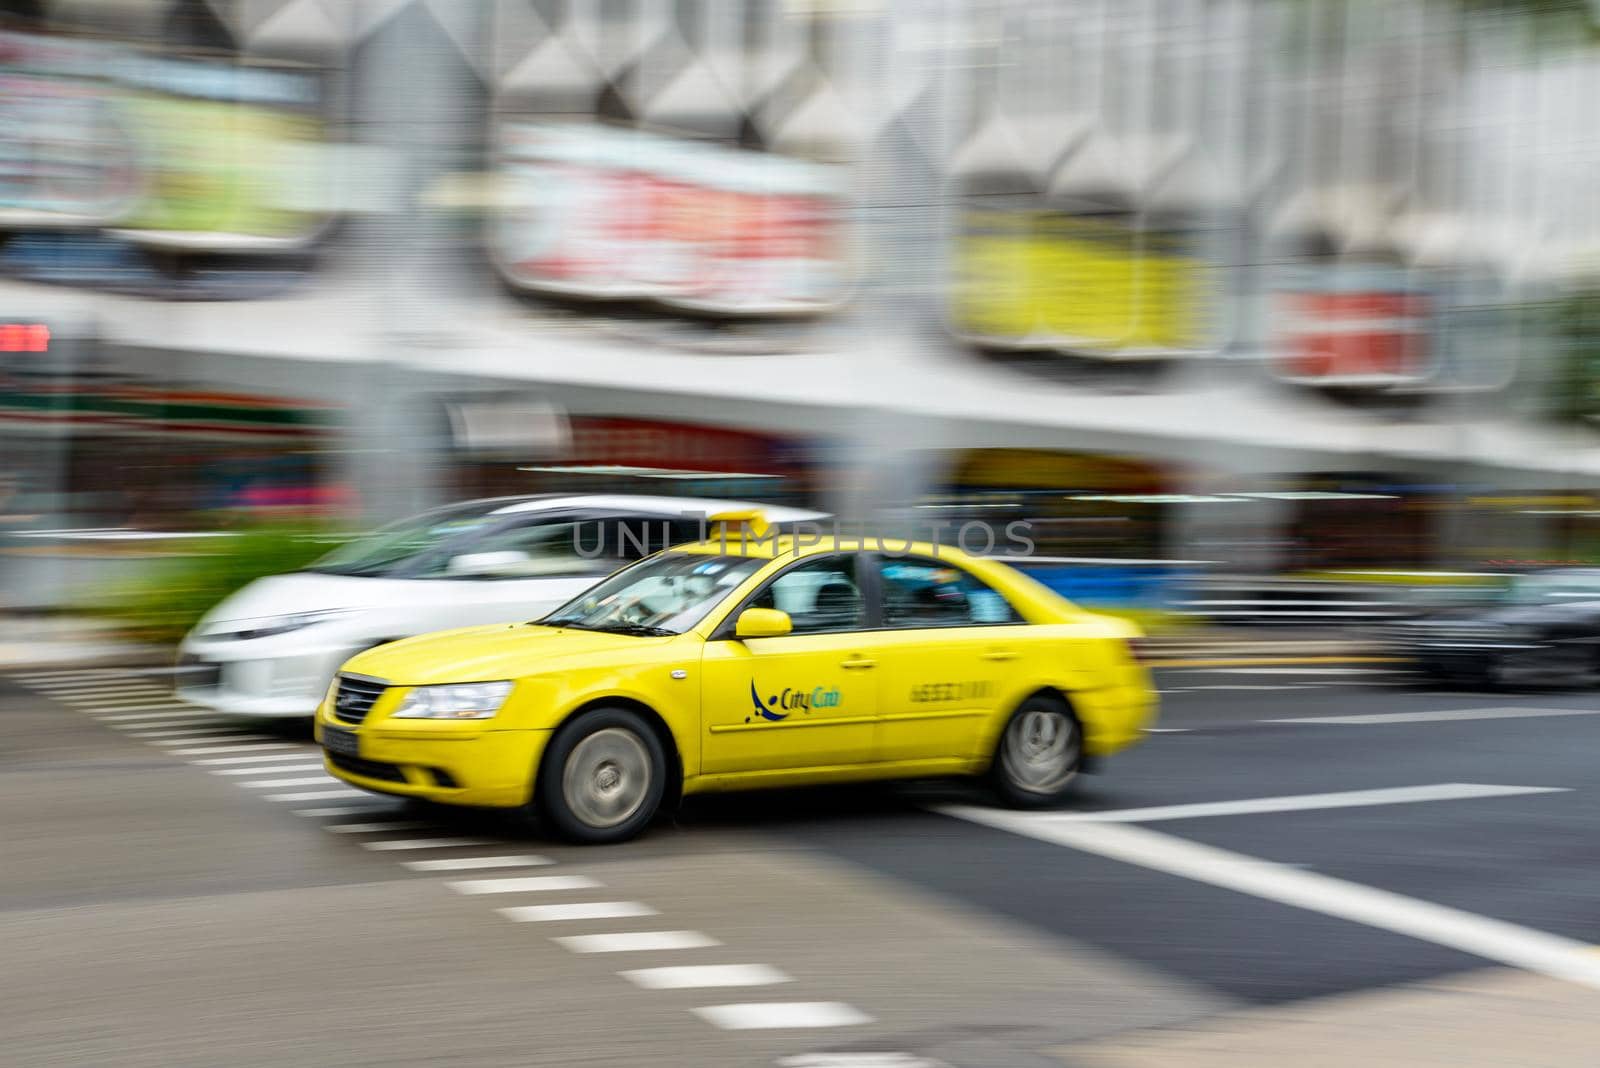 Yellow Hyundai taxi in Singapore with motion blur by dutourdumonde